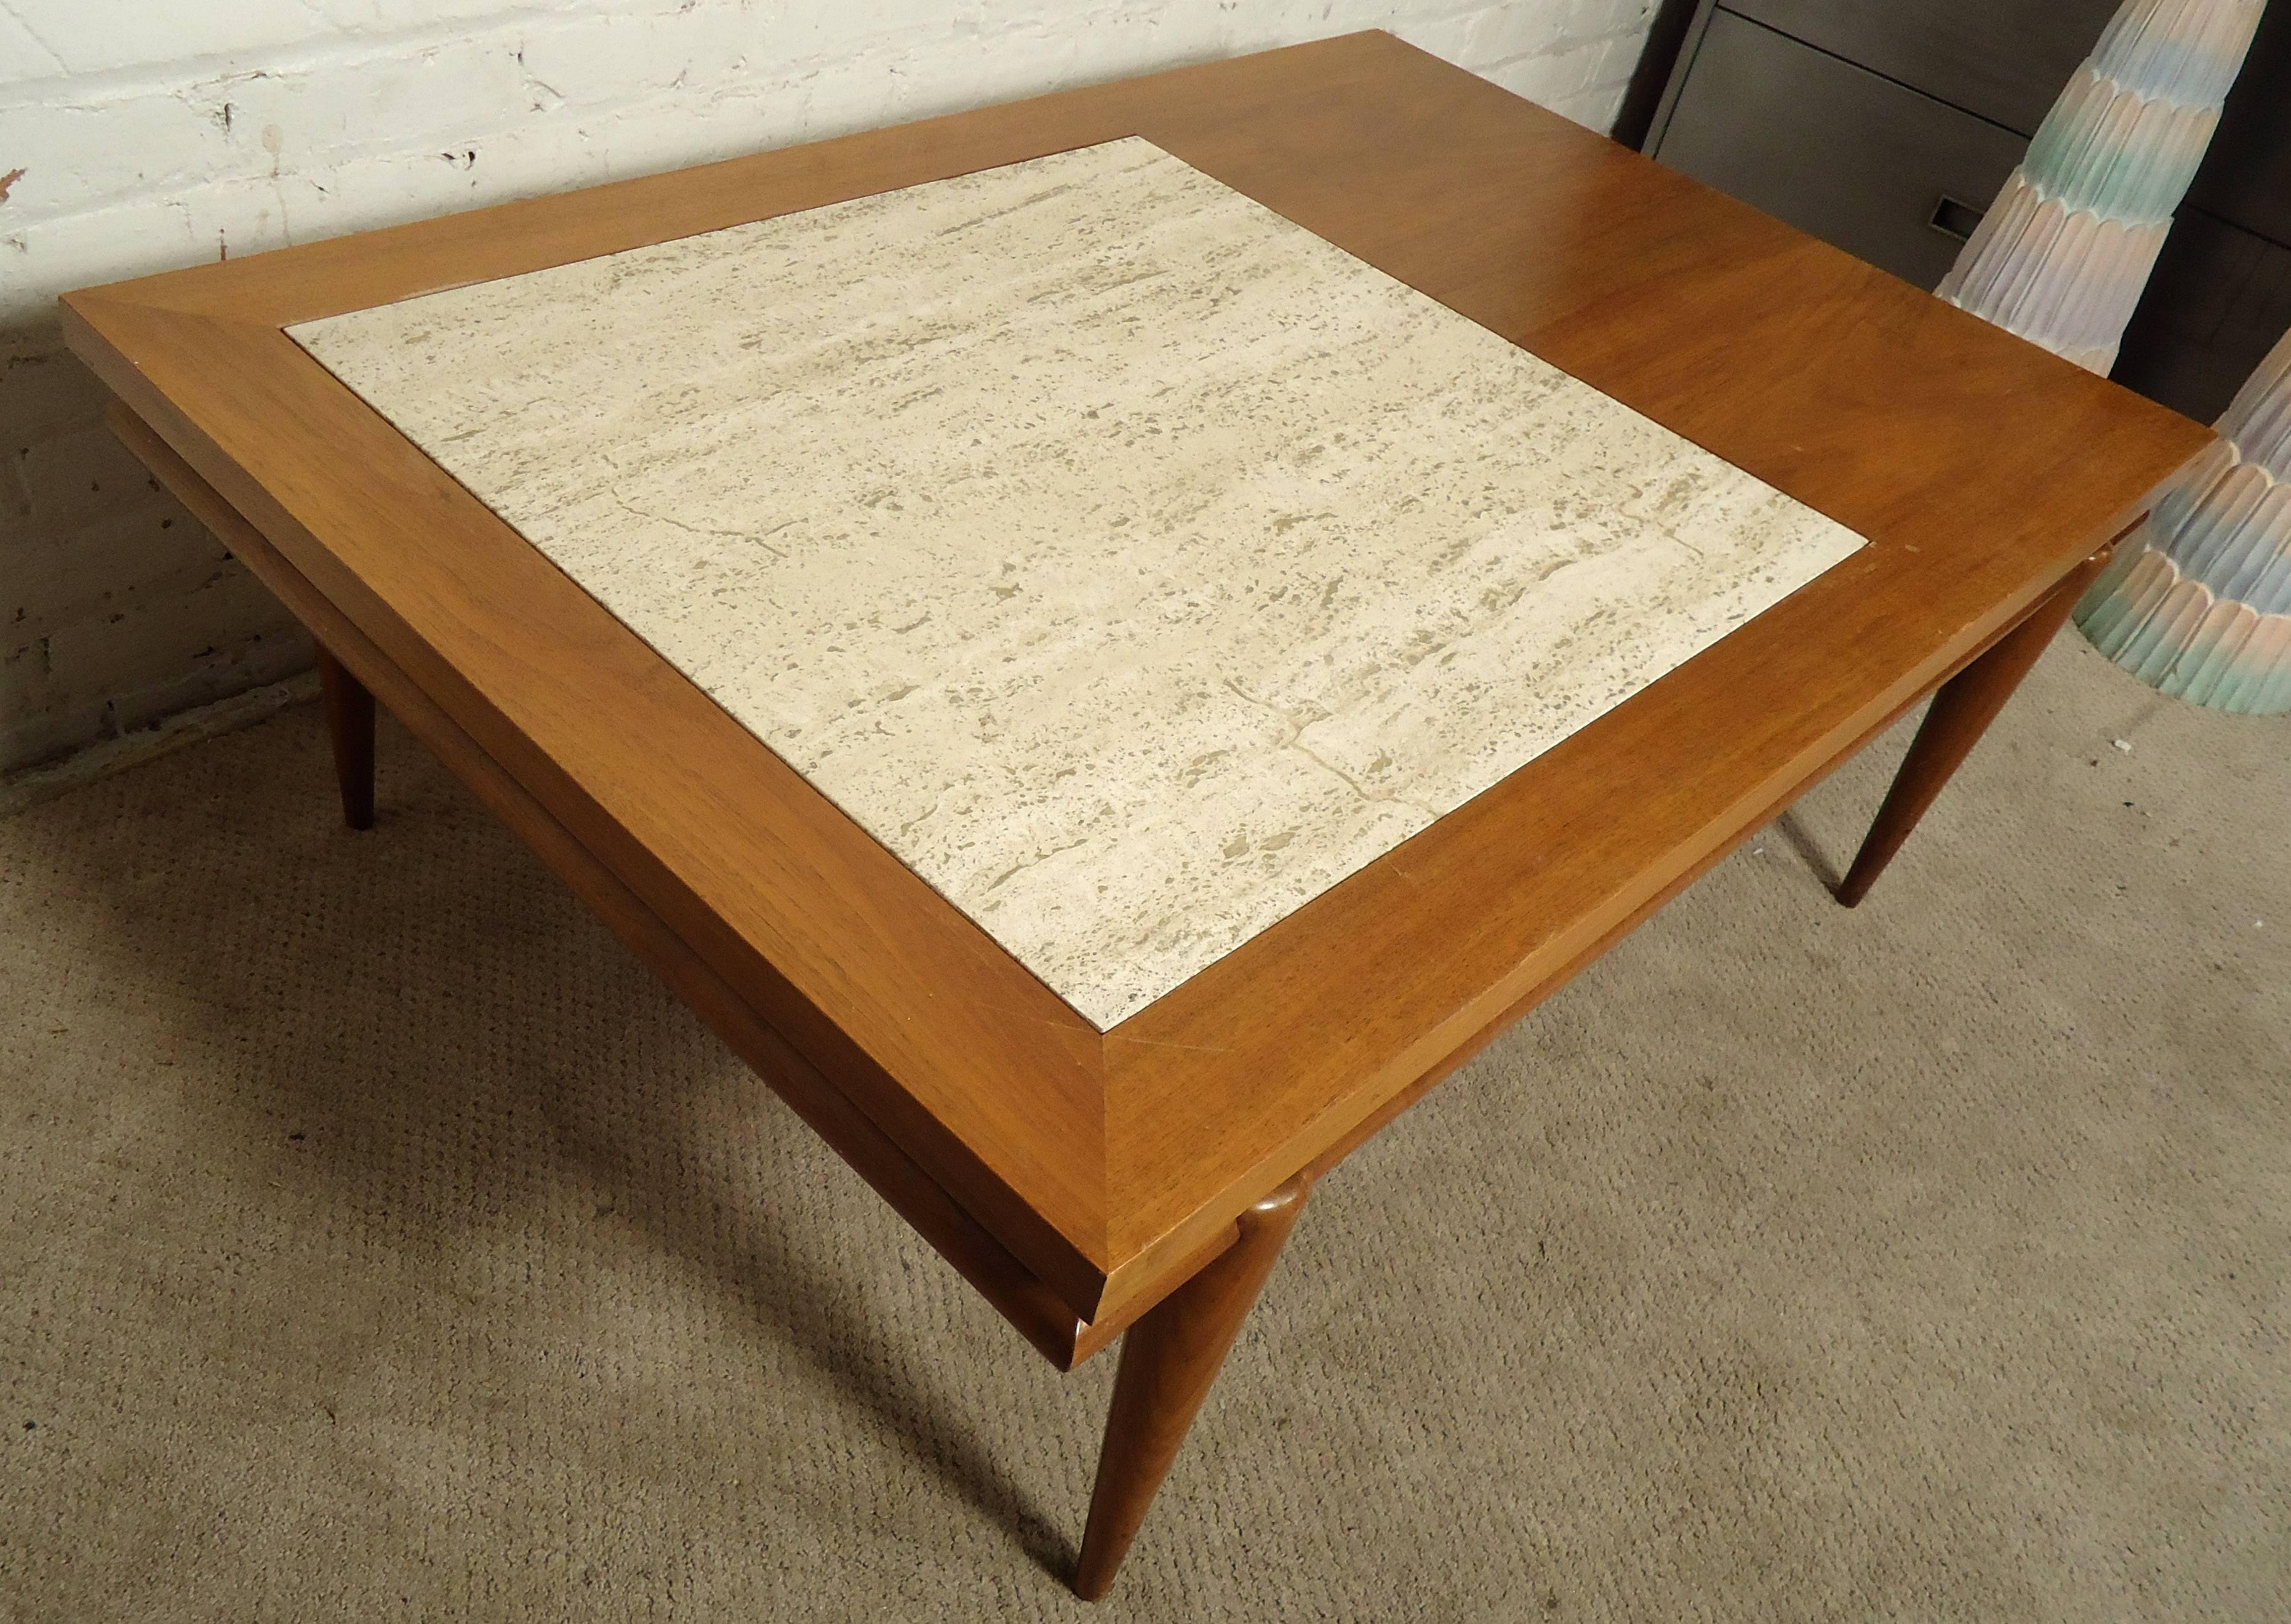 Vintage-modern coffee table featuring sculpted base and marble insert, designed by John Widdicomb. Please confirm item location NY or NJ with dealer.